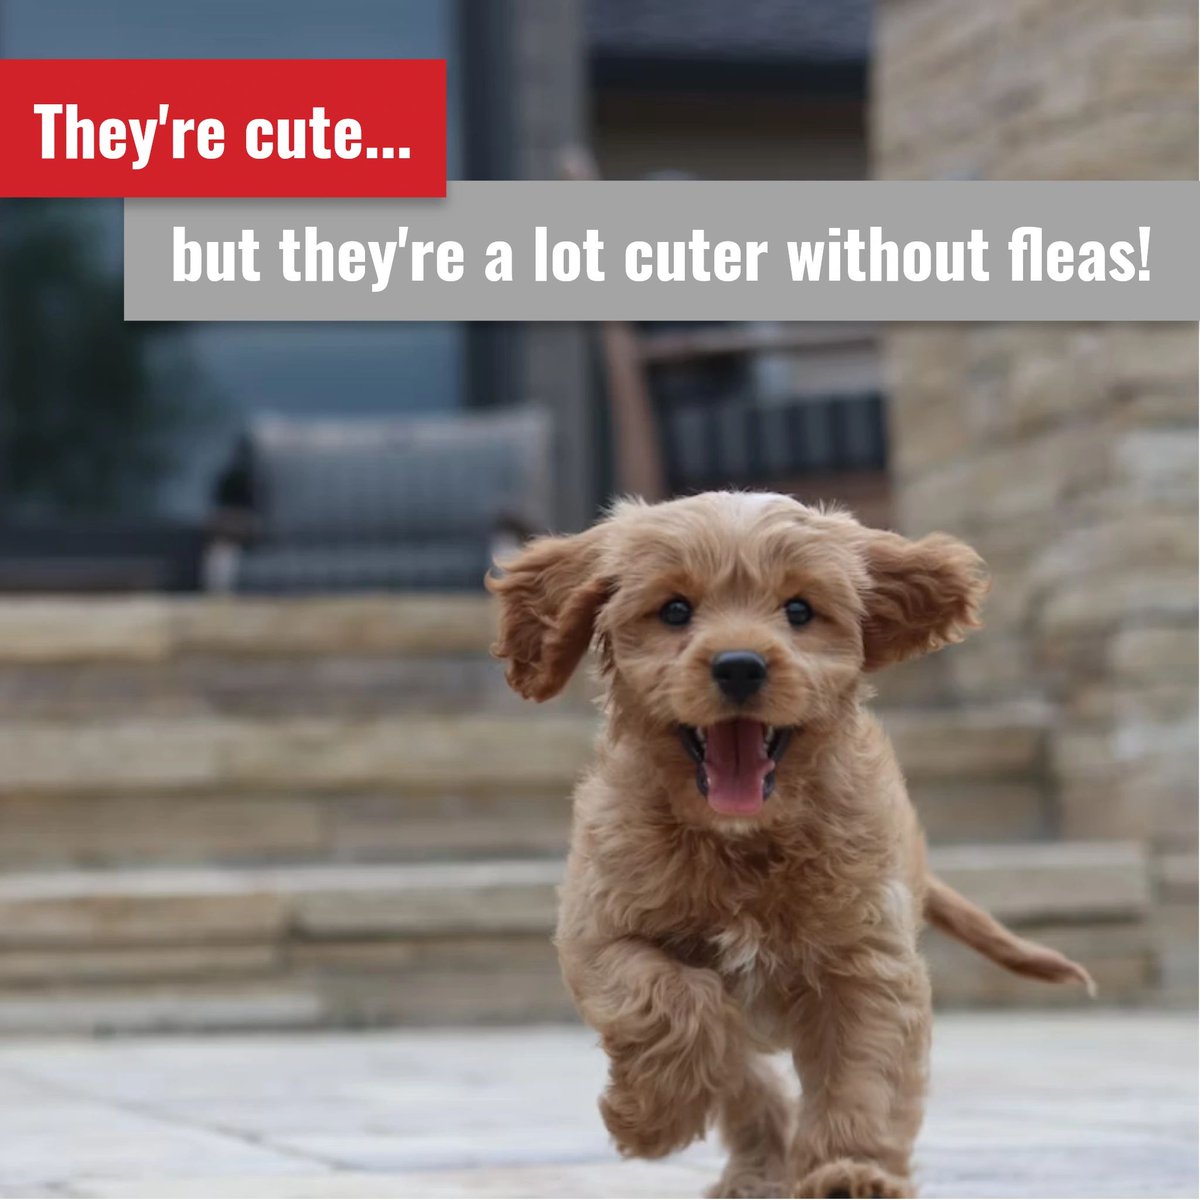 While their monthly flea medication is a start, it's a smart idea to take the extra step to keep fleas from entering your backyard in the first place! If you're interested in our #FleaControl options, just give us a call. #PestControl #pests #fleas #FleaSeason